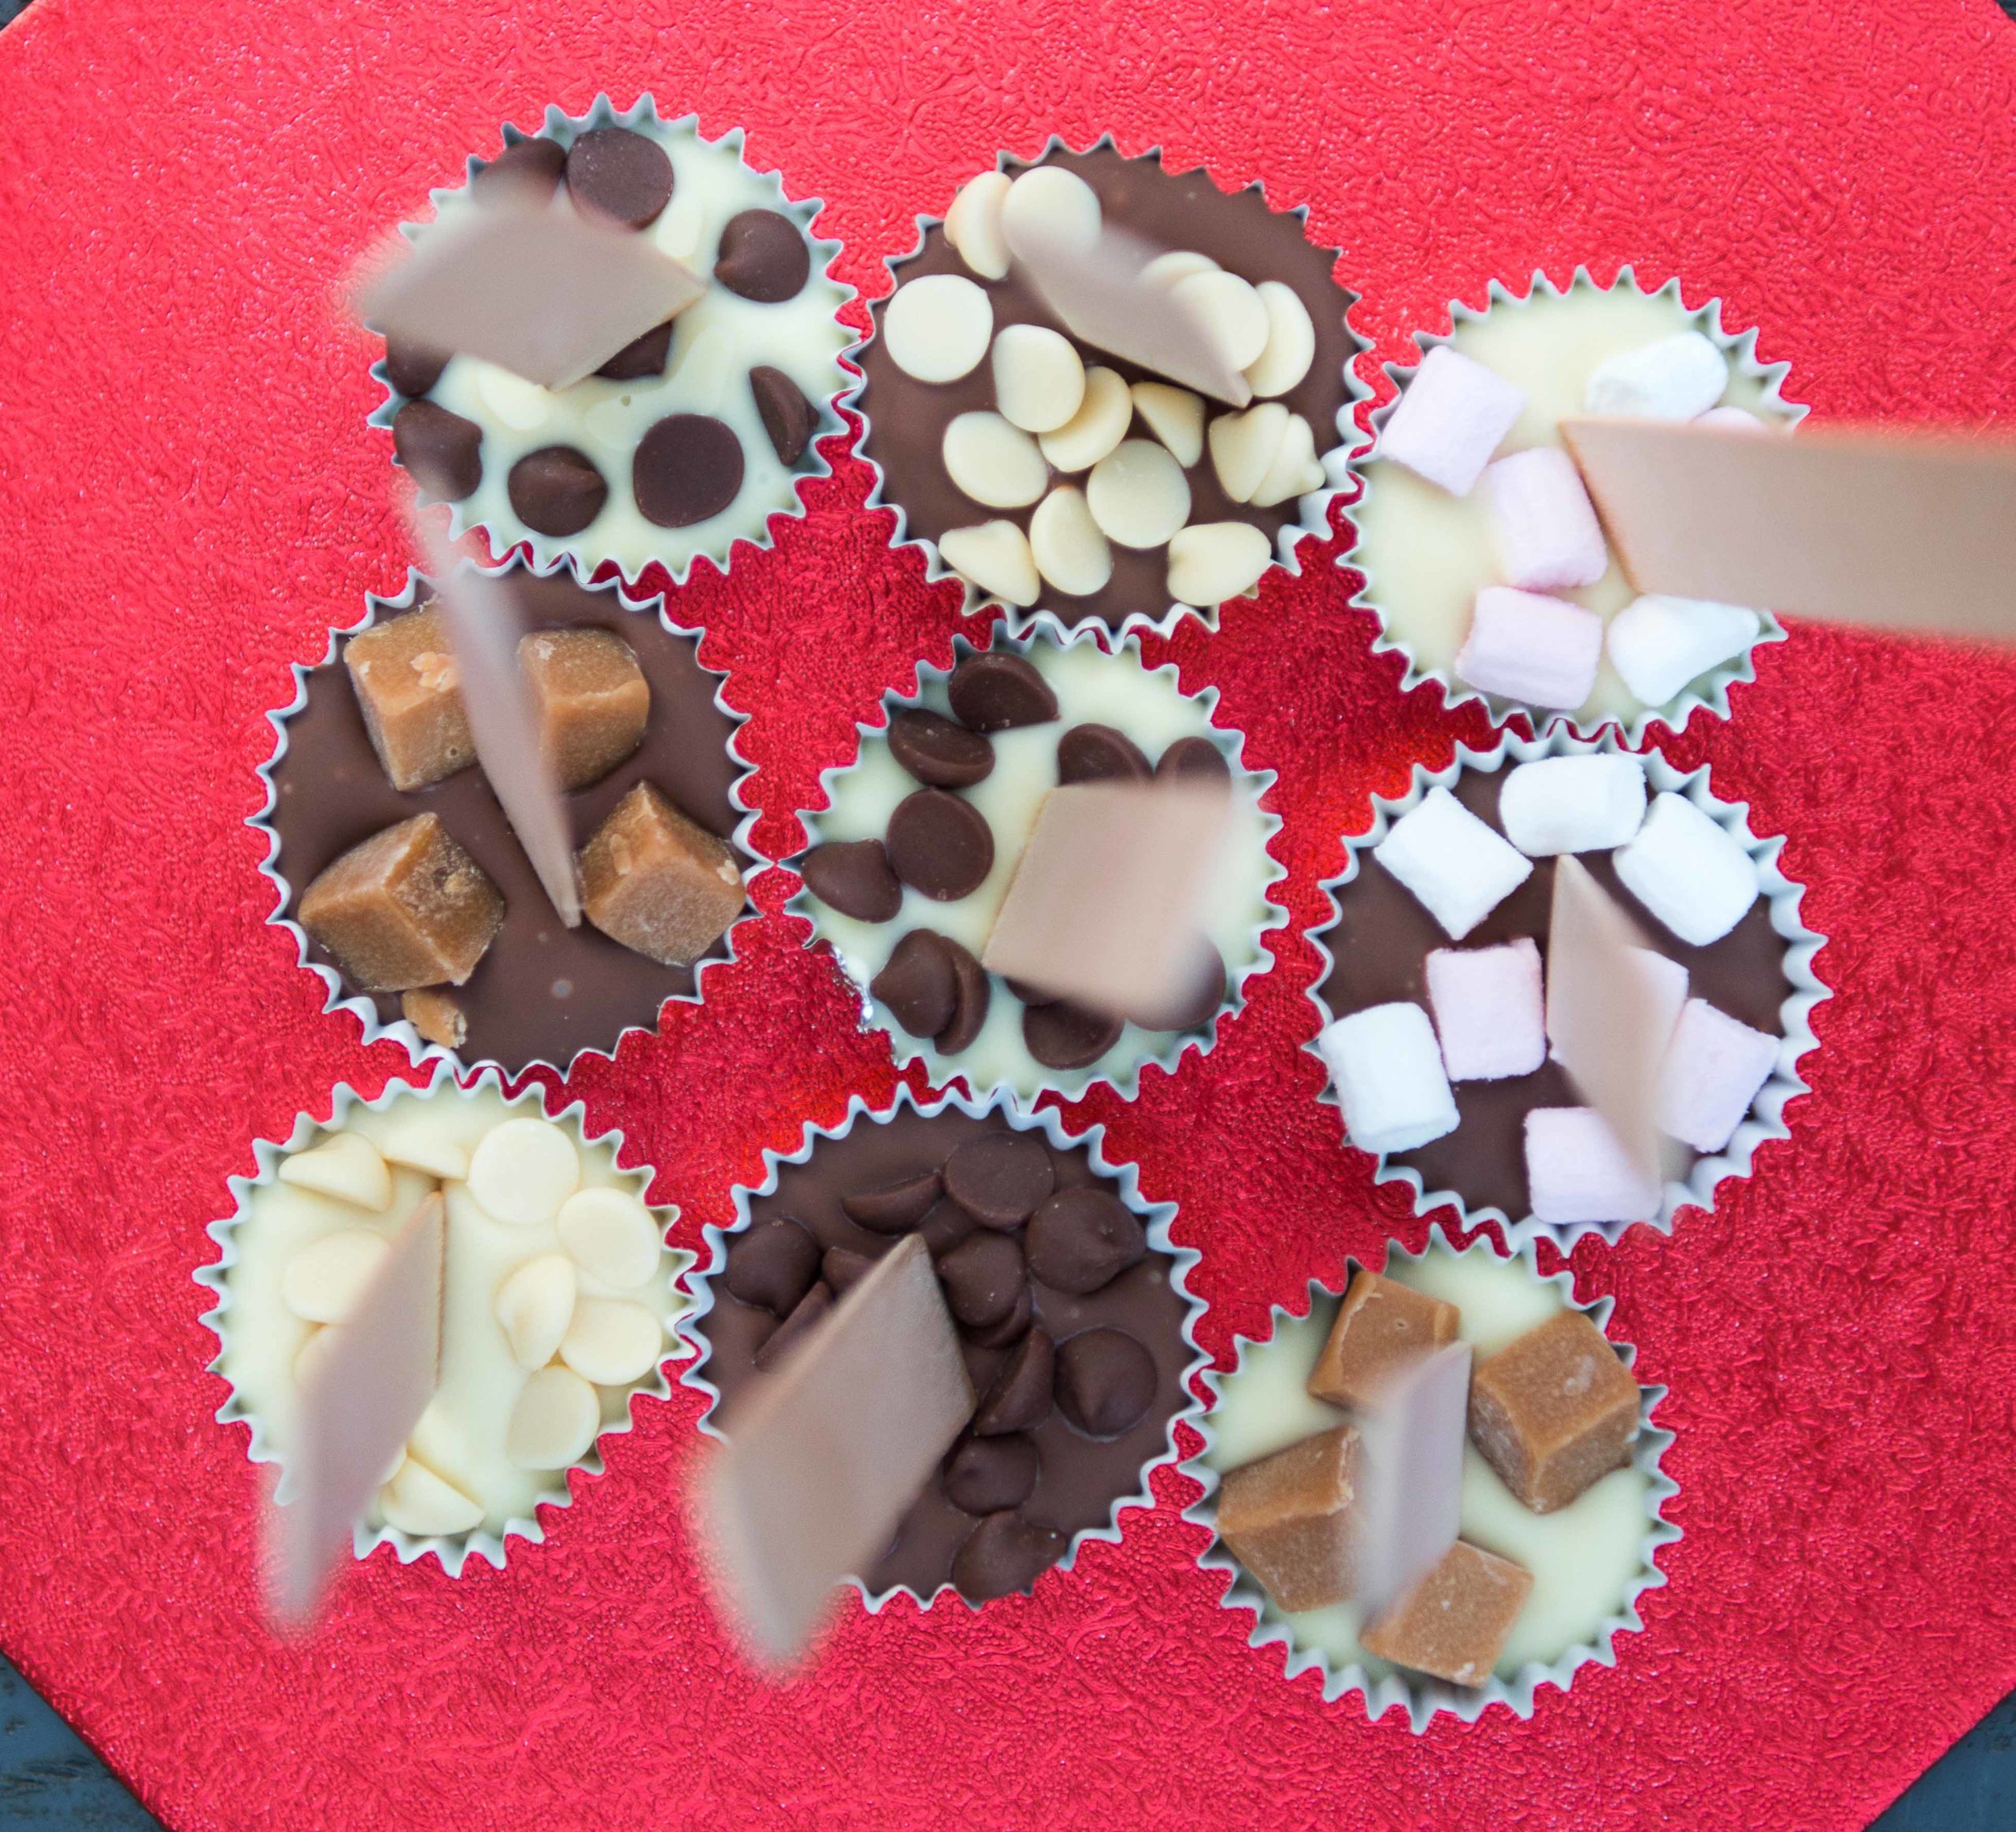 https://homecookingwithjulie.com/wp-content/uploads/2020/12/CHOCOLATE-STIRRERS-Recipe-by-Julie-Neville_23-scaled.jpg